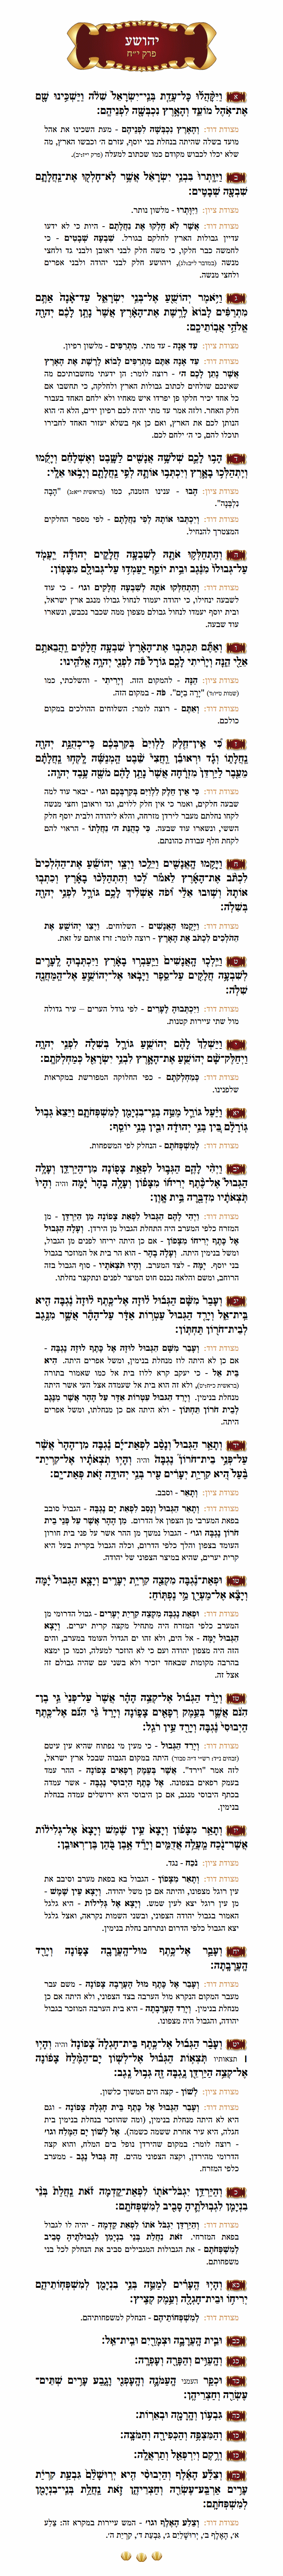 Sefer Yehoshua Chapter 18 with commentary